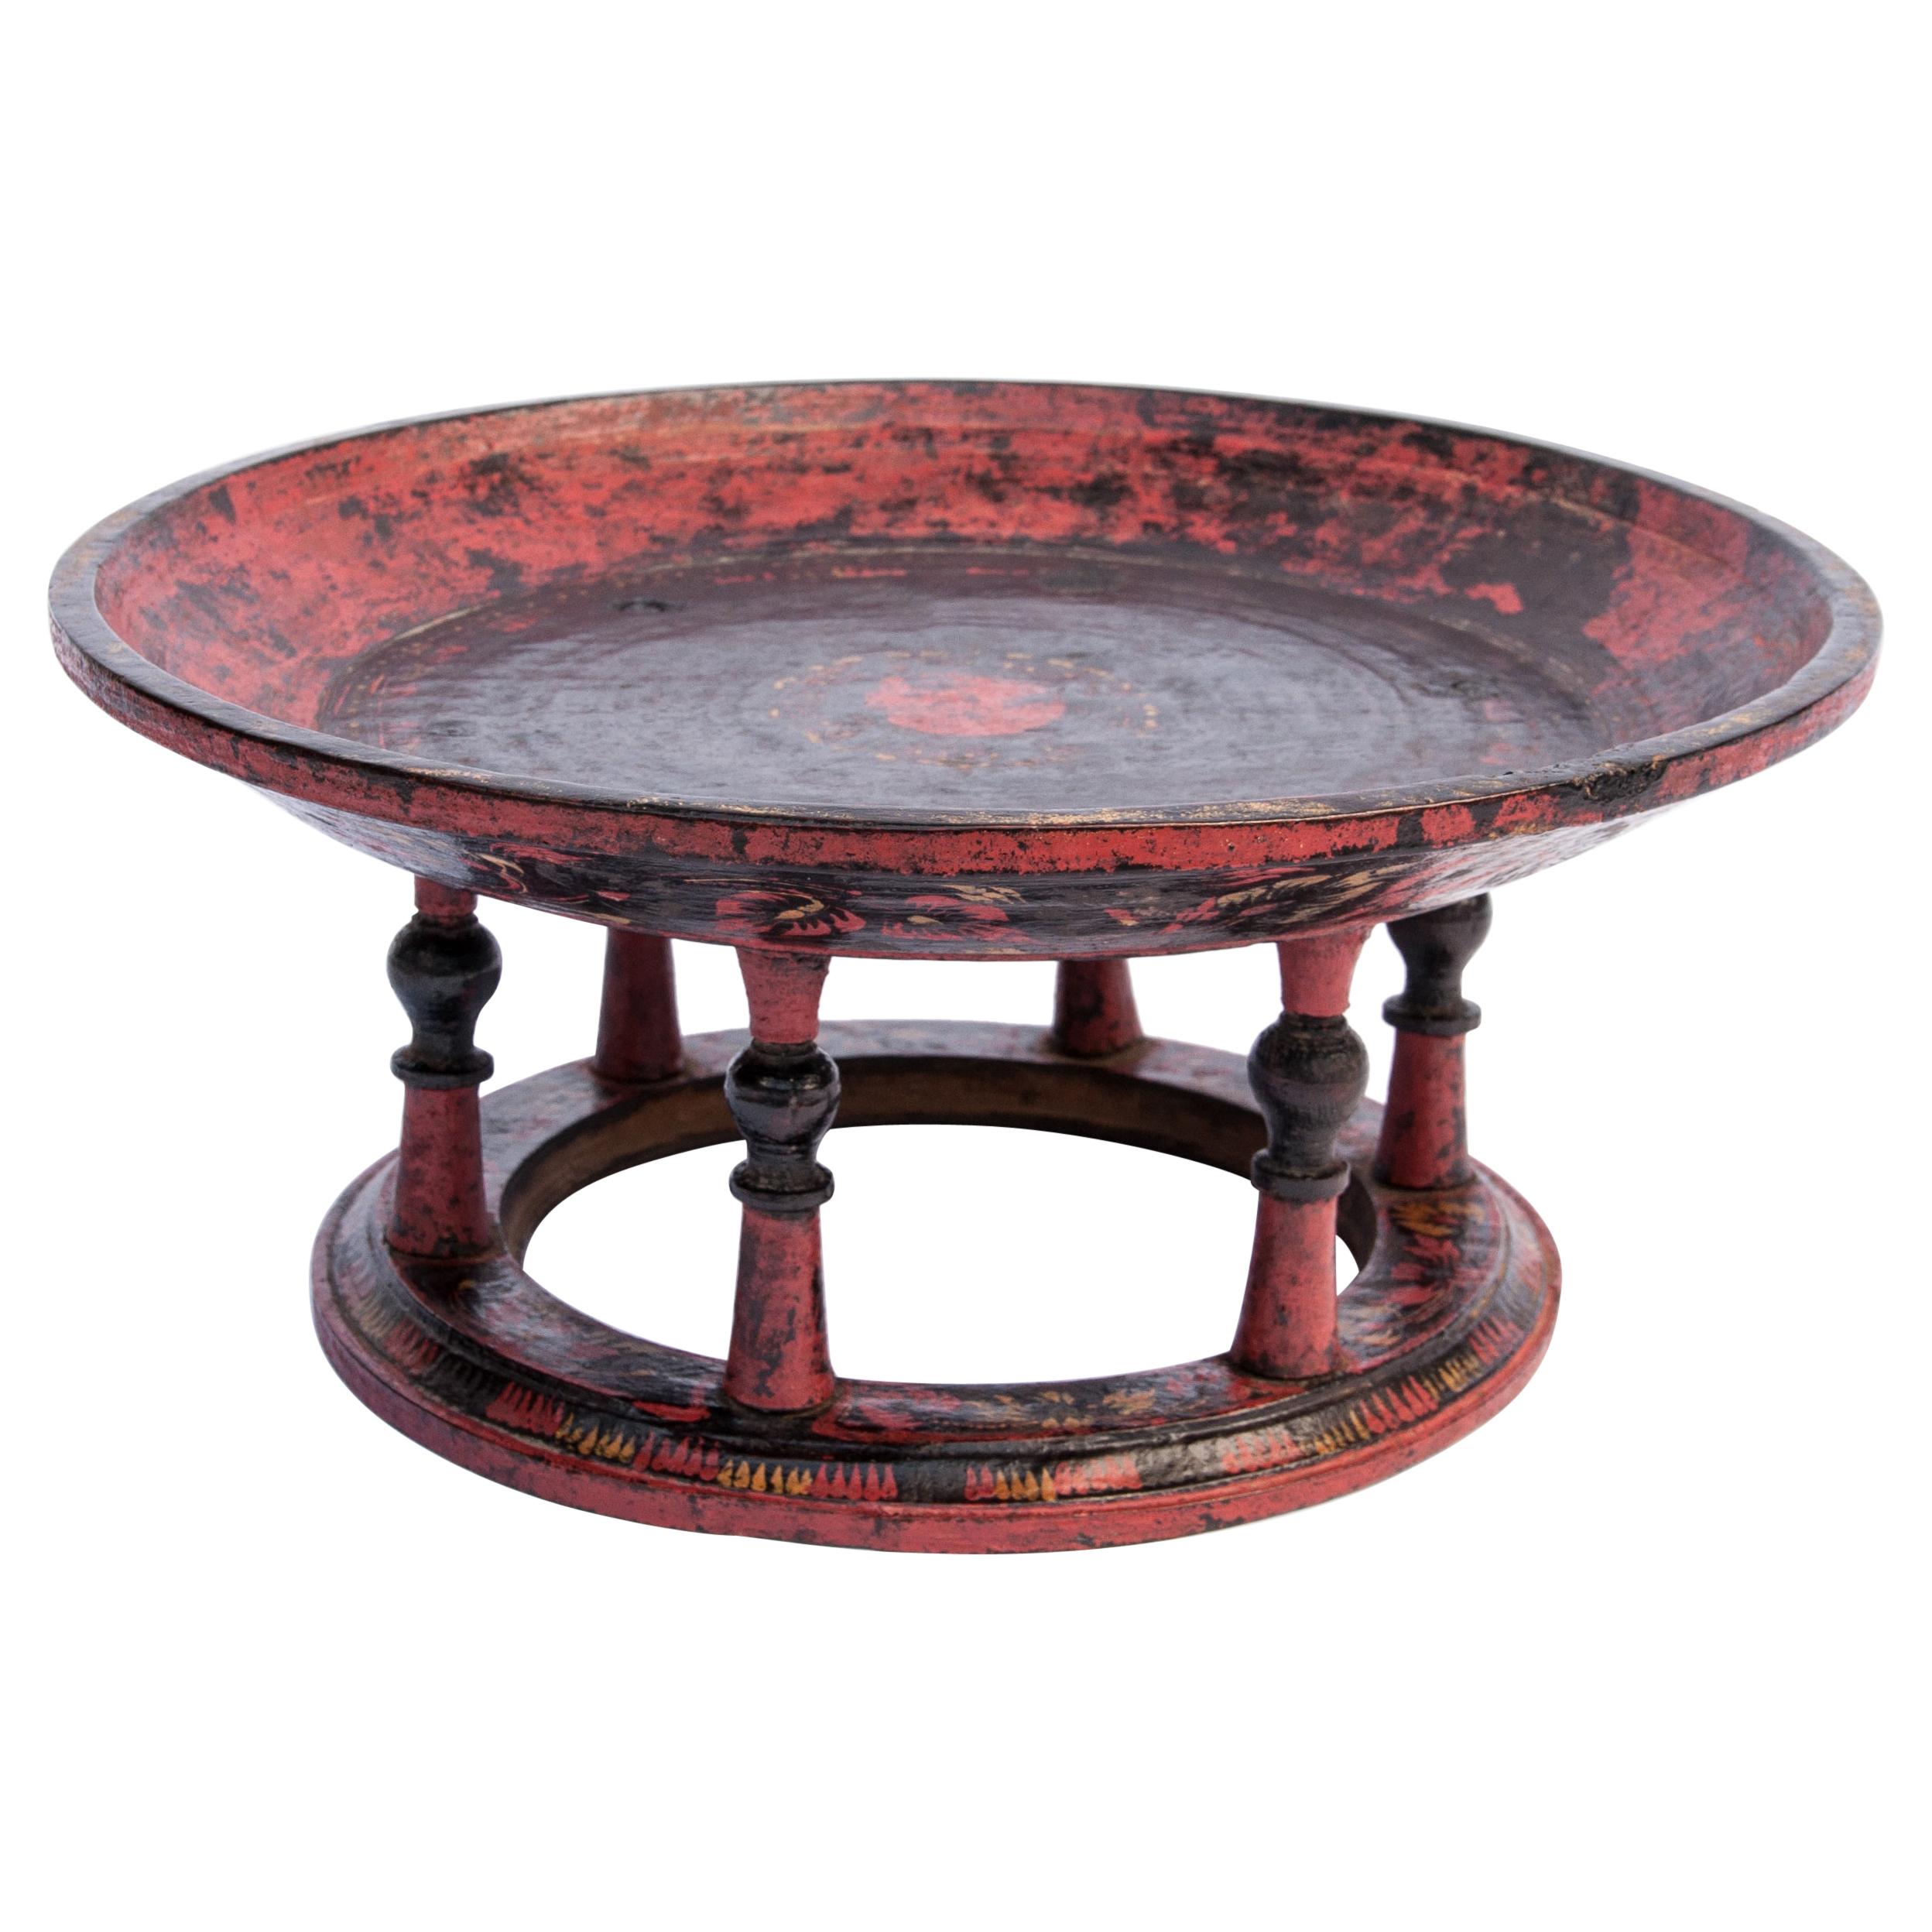 Vintage Painted Lacquer Tray on Stand, Shan of Burma, Early to Mid-20th Century